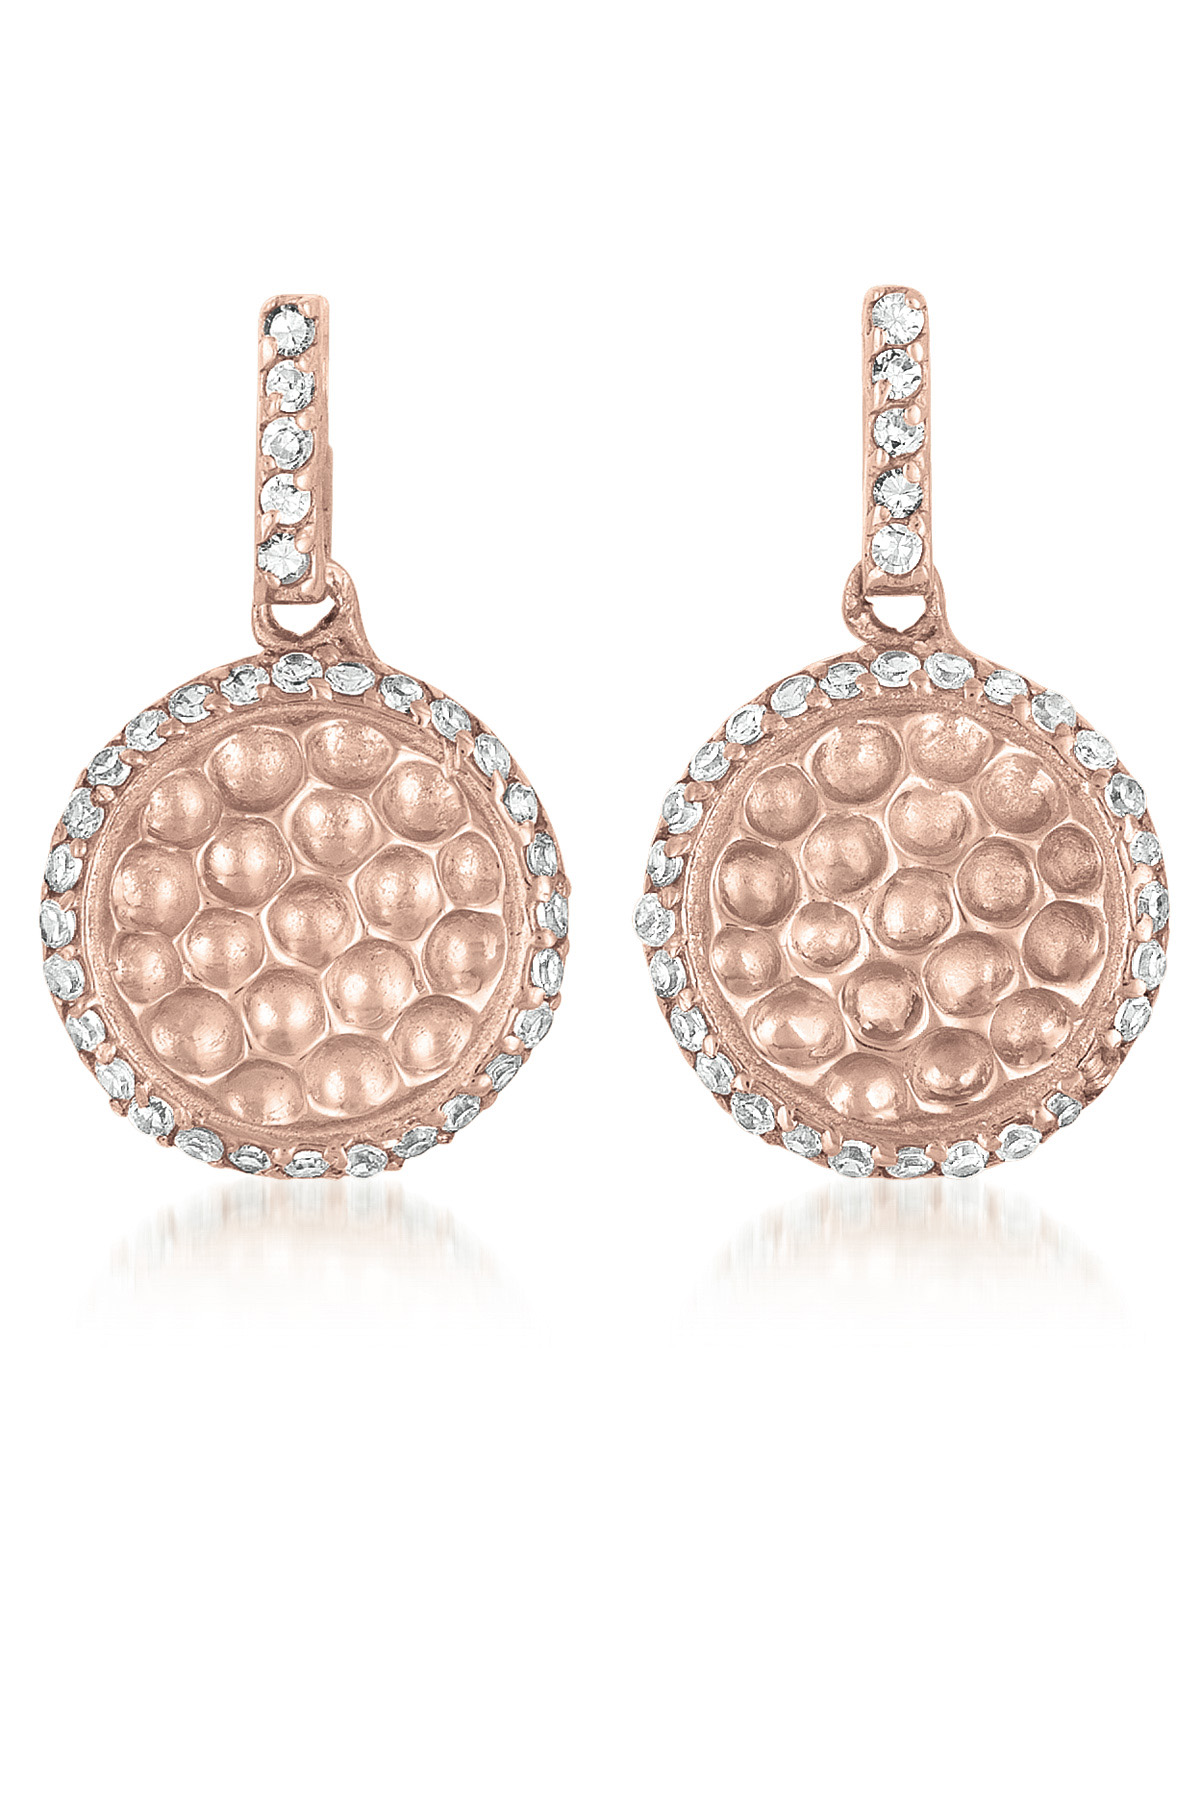 Cubic Zirconia (.925) Sterling Silver Rose Plated Hammered Round Drop Earrings